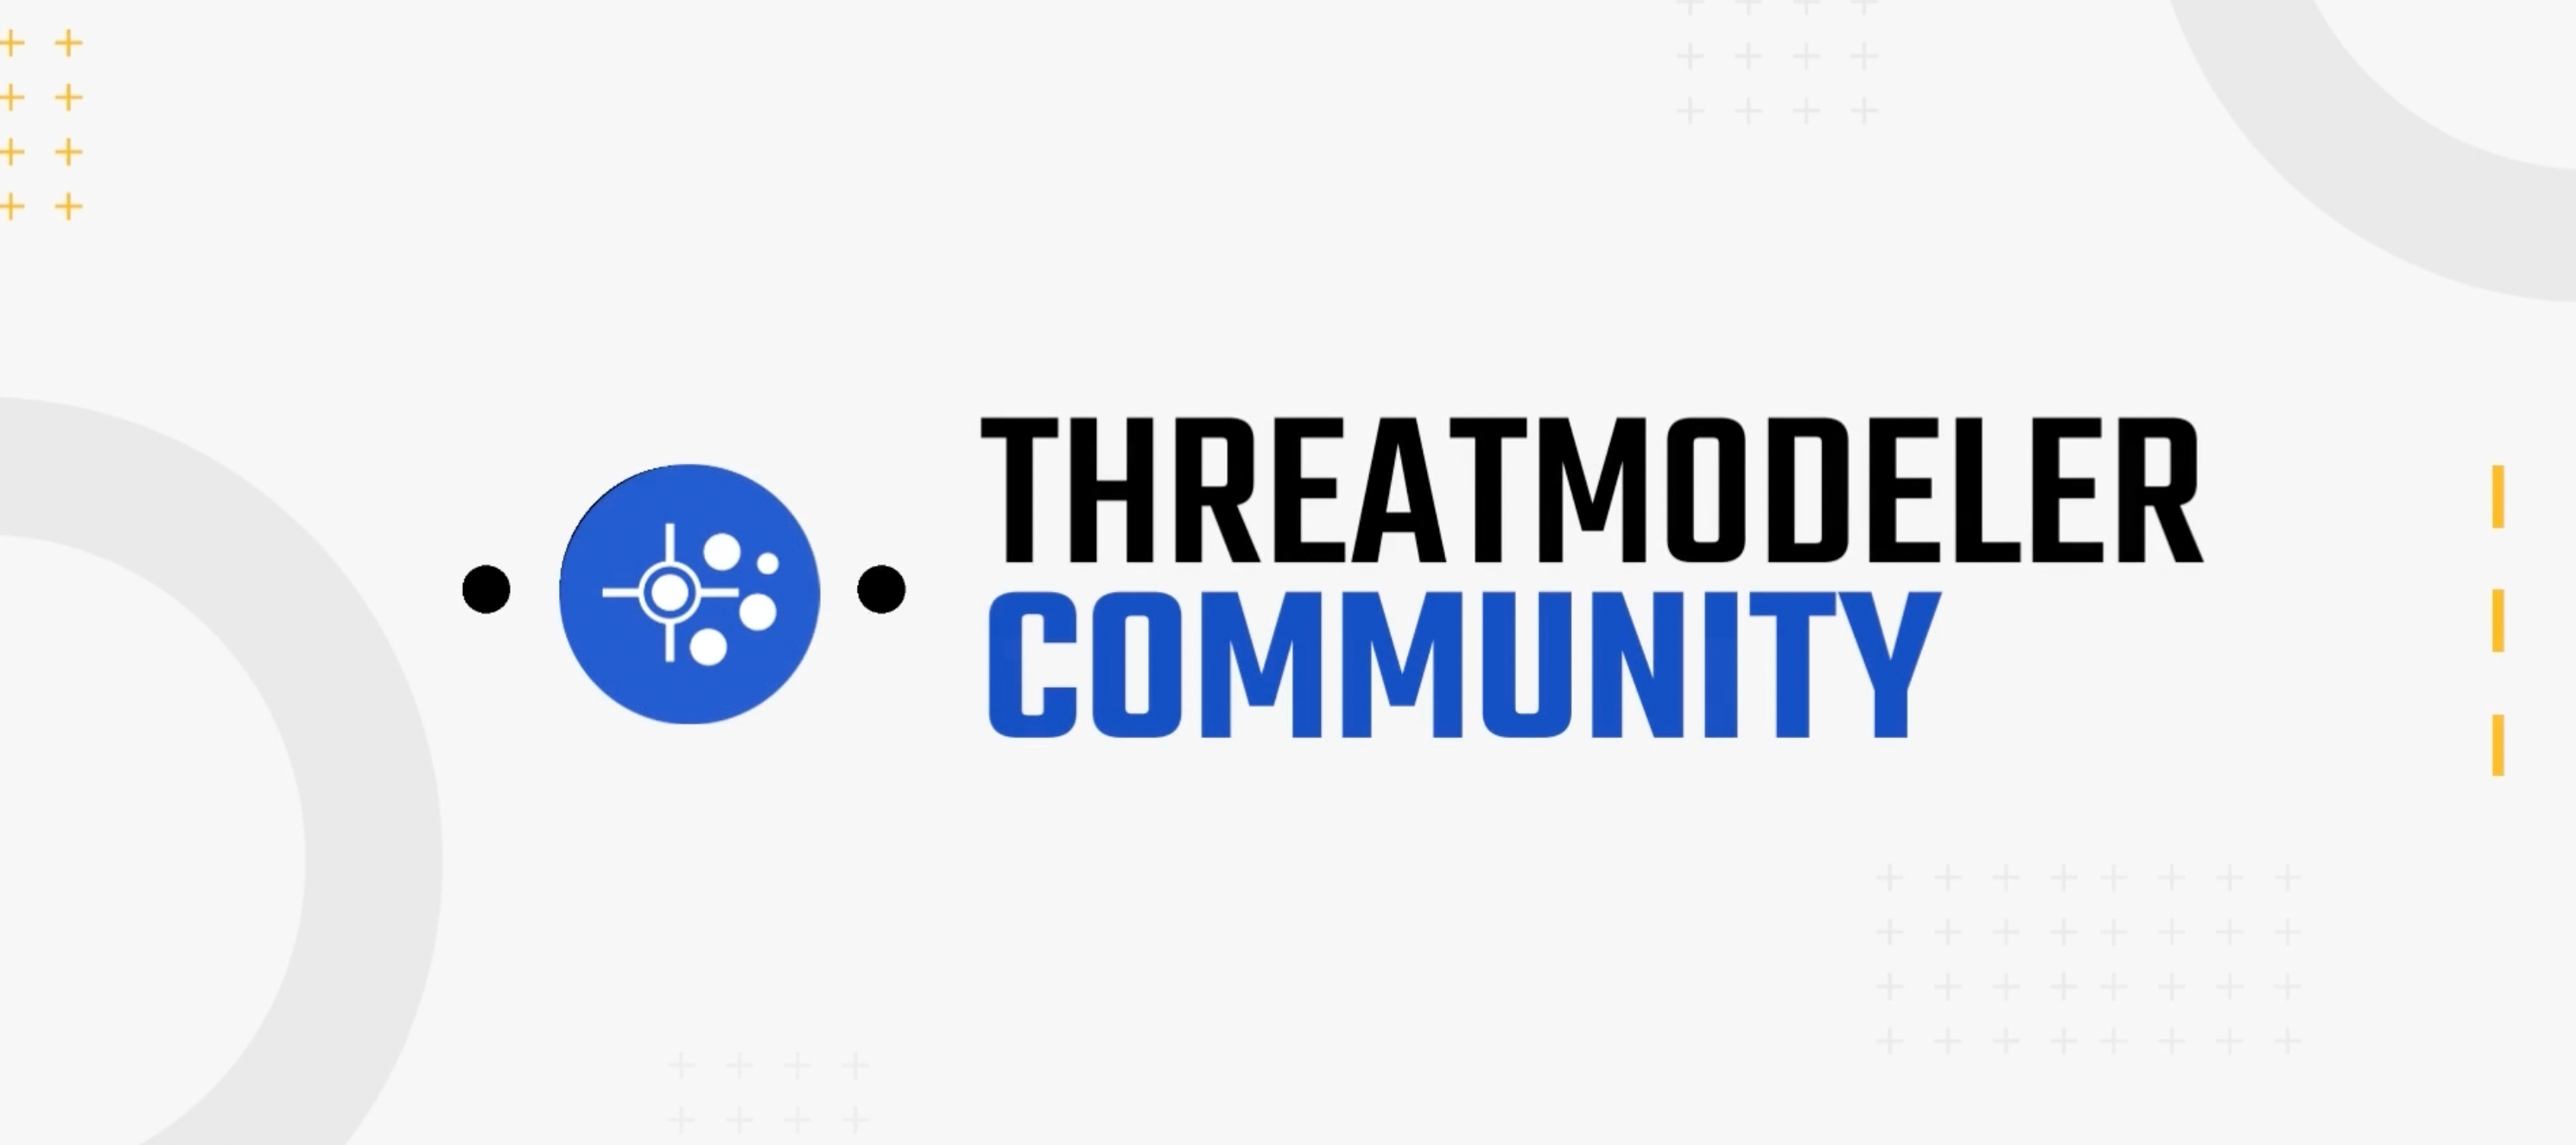 Fireside Chat: Why a Threat Modeler Community?